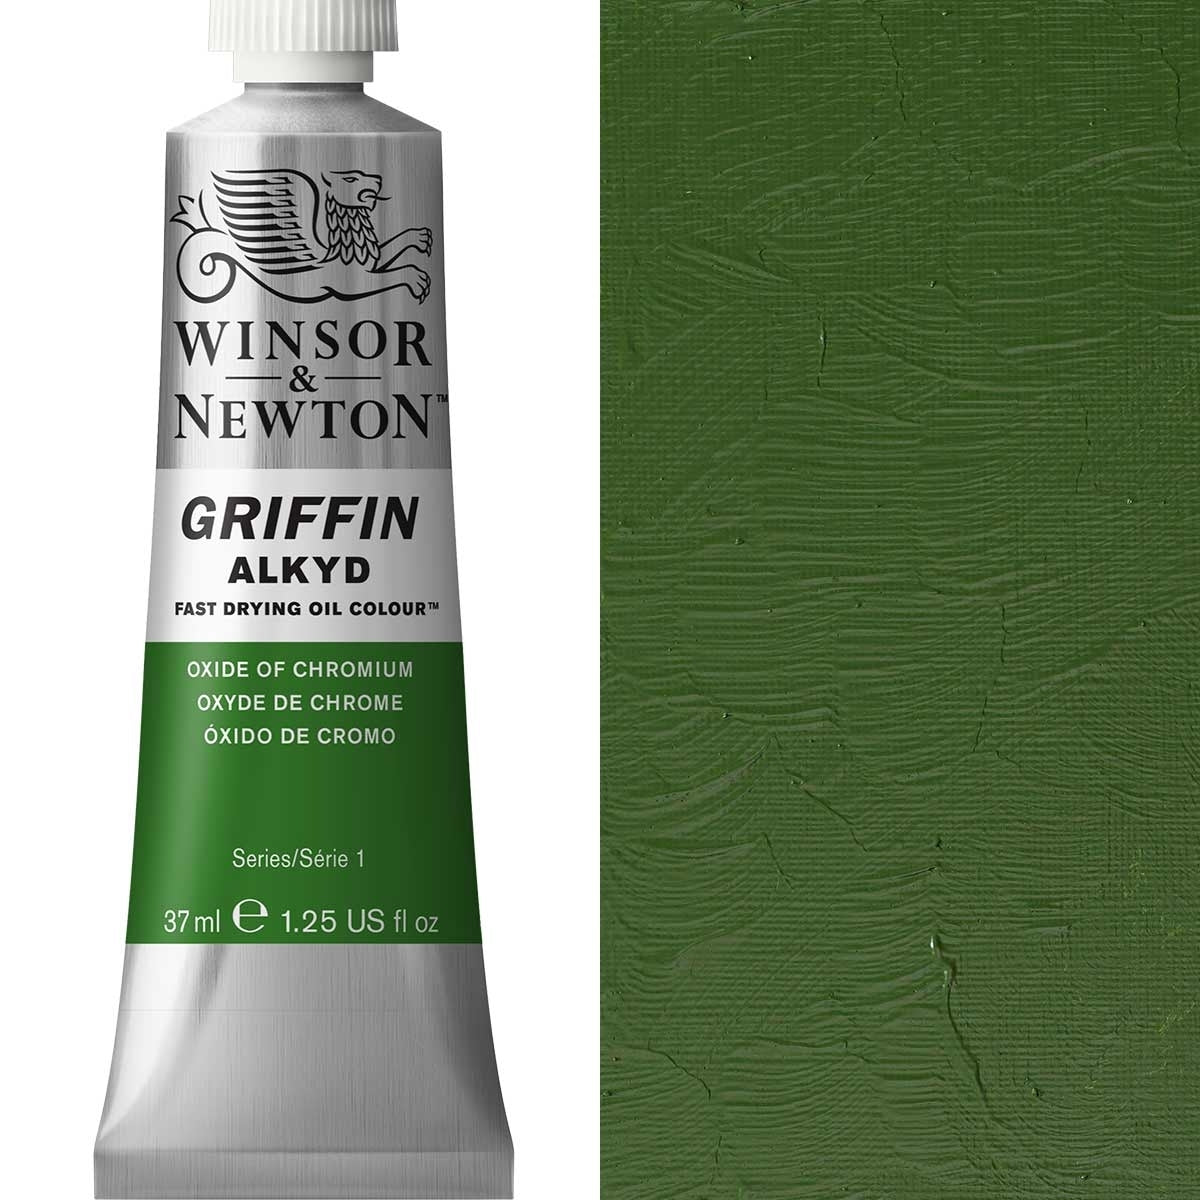 Winsor and Newton - Griffin ALKYD Oil Colour - 37ml - Oxide Of Chromium